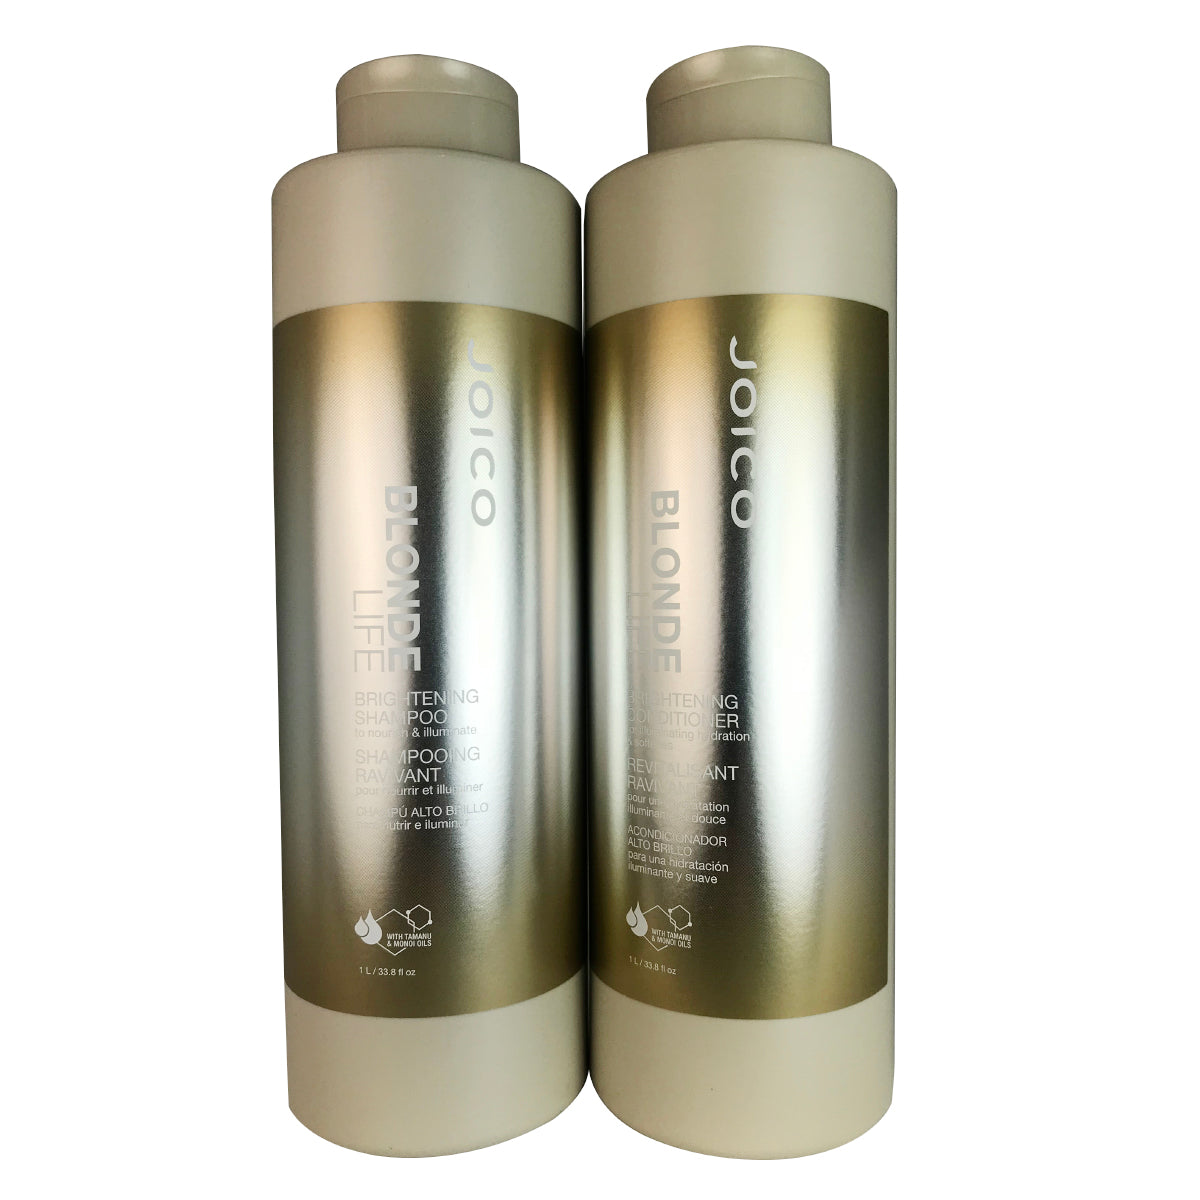 Joico Blonde Life Brightening Hair Shampoo and Conditioner Duo 33.8 oz Each